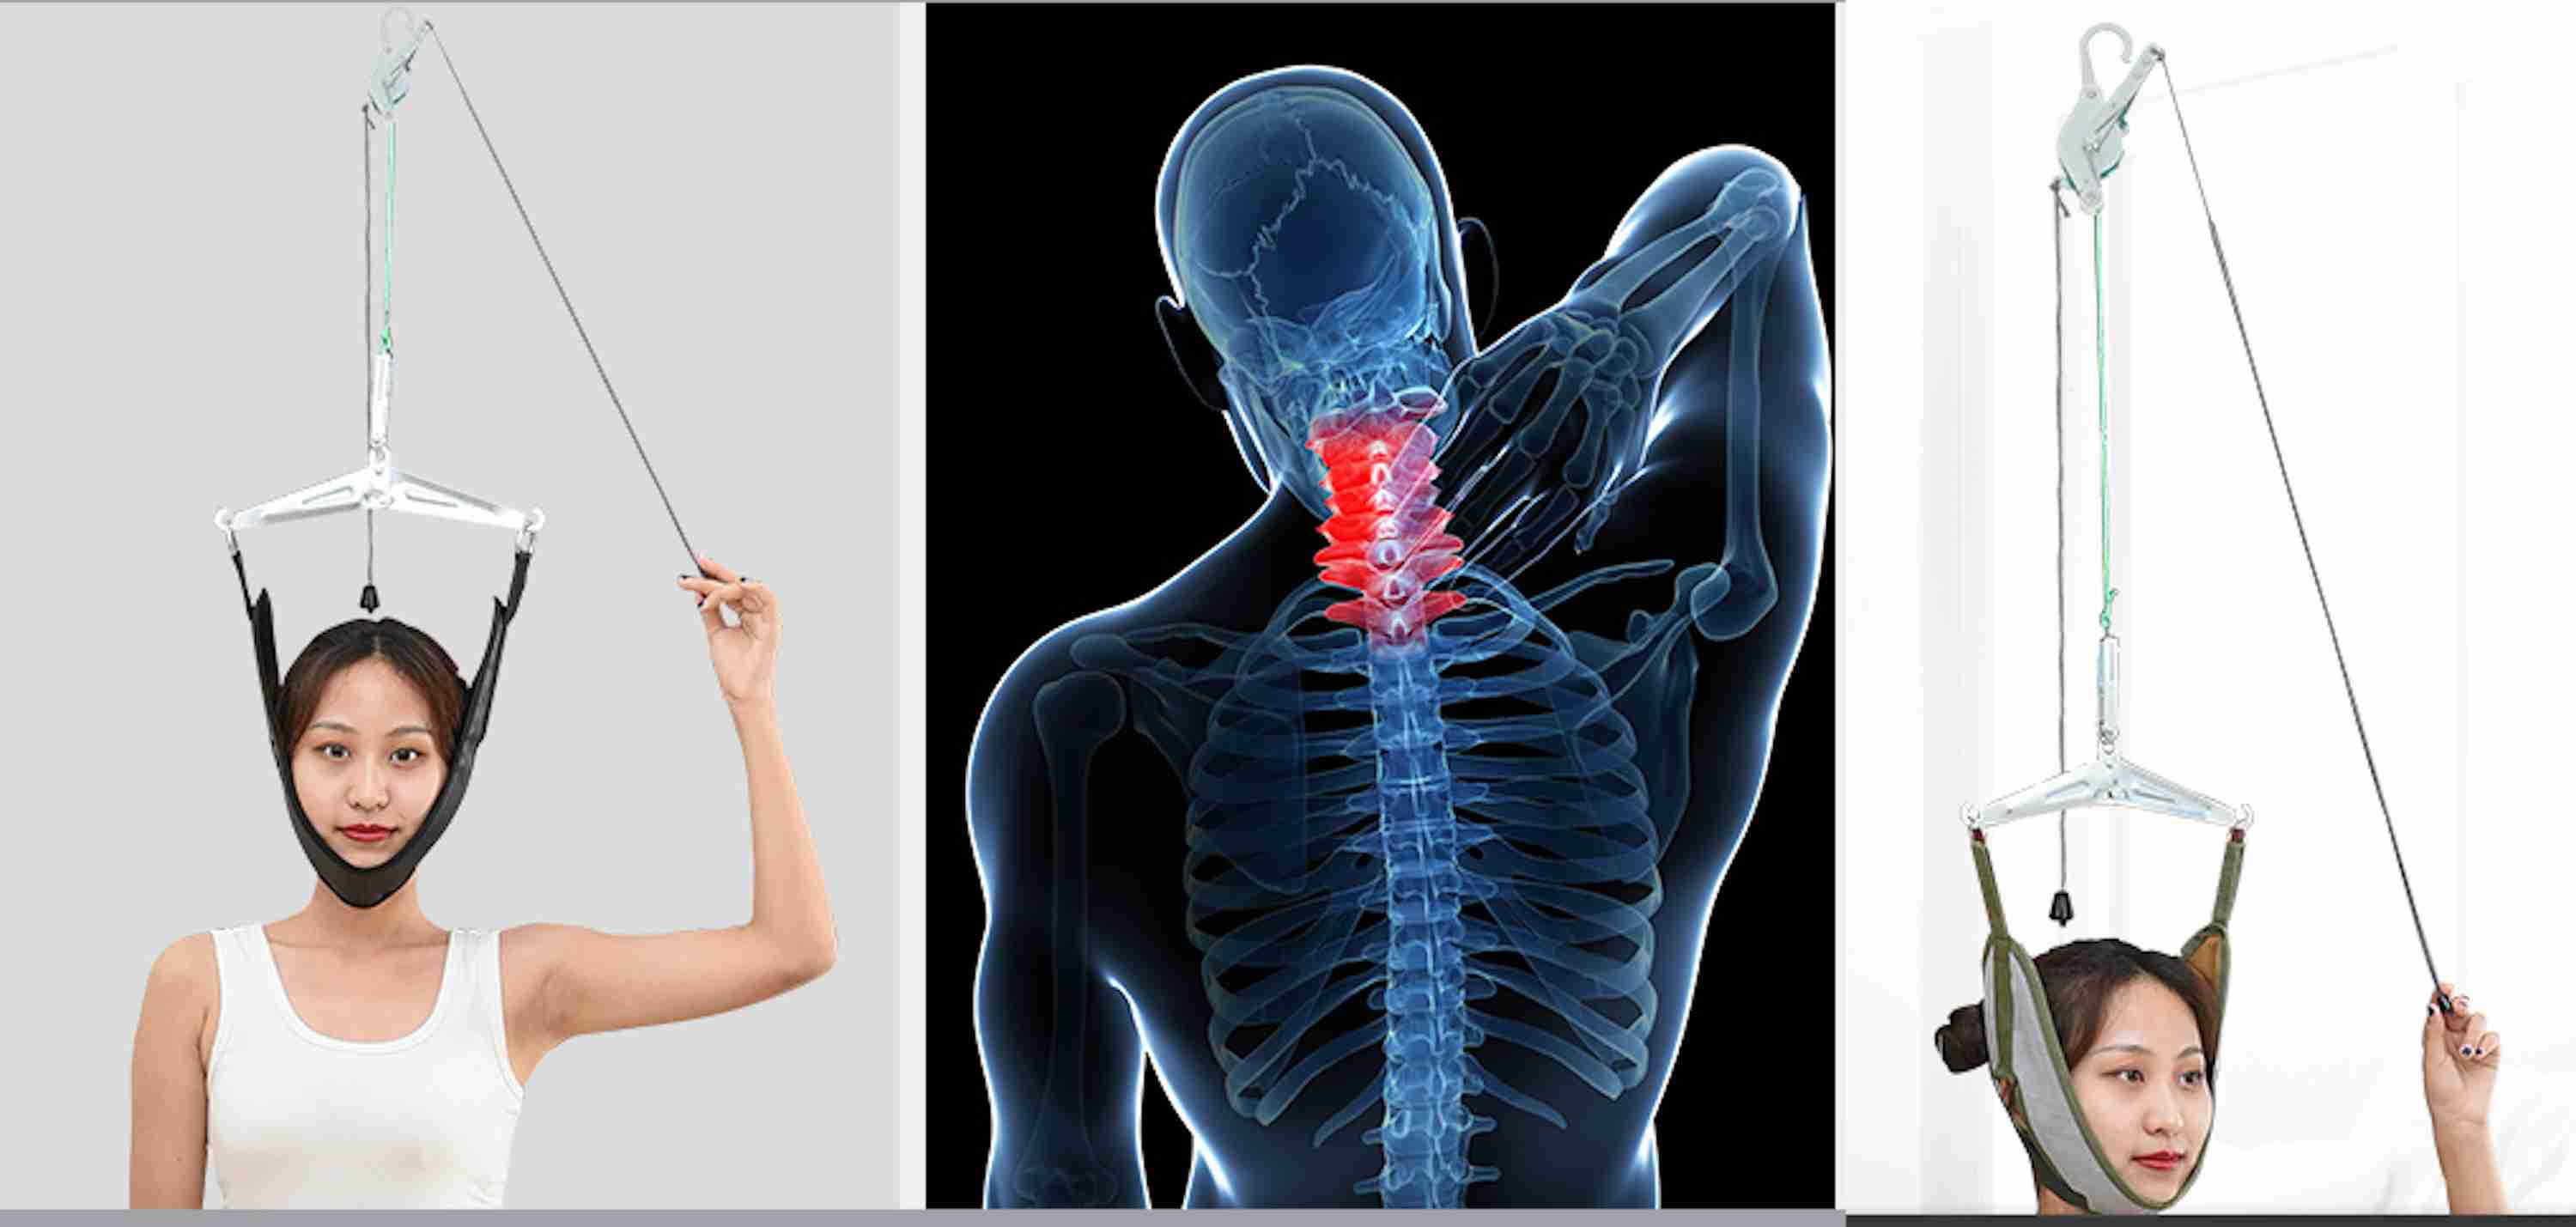 physiotherapy device for self-treatment of the cervical spine